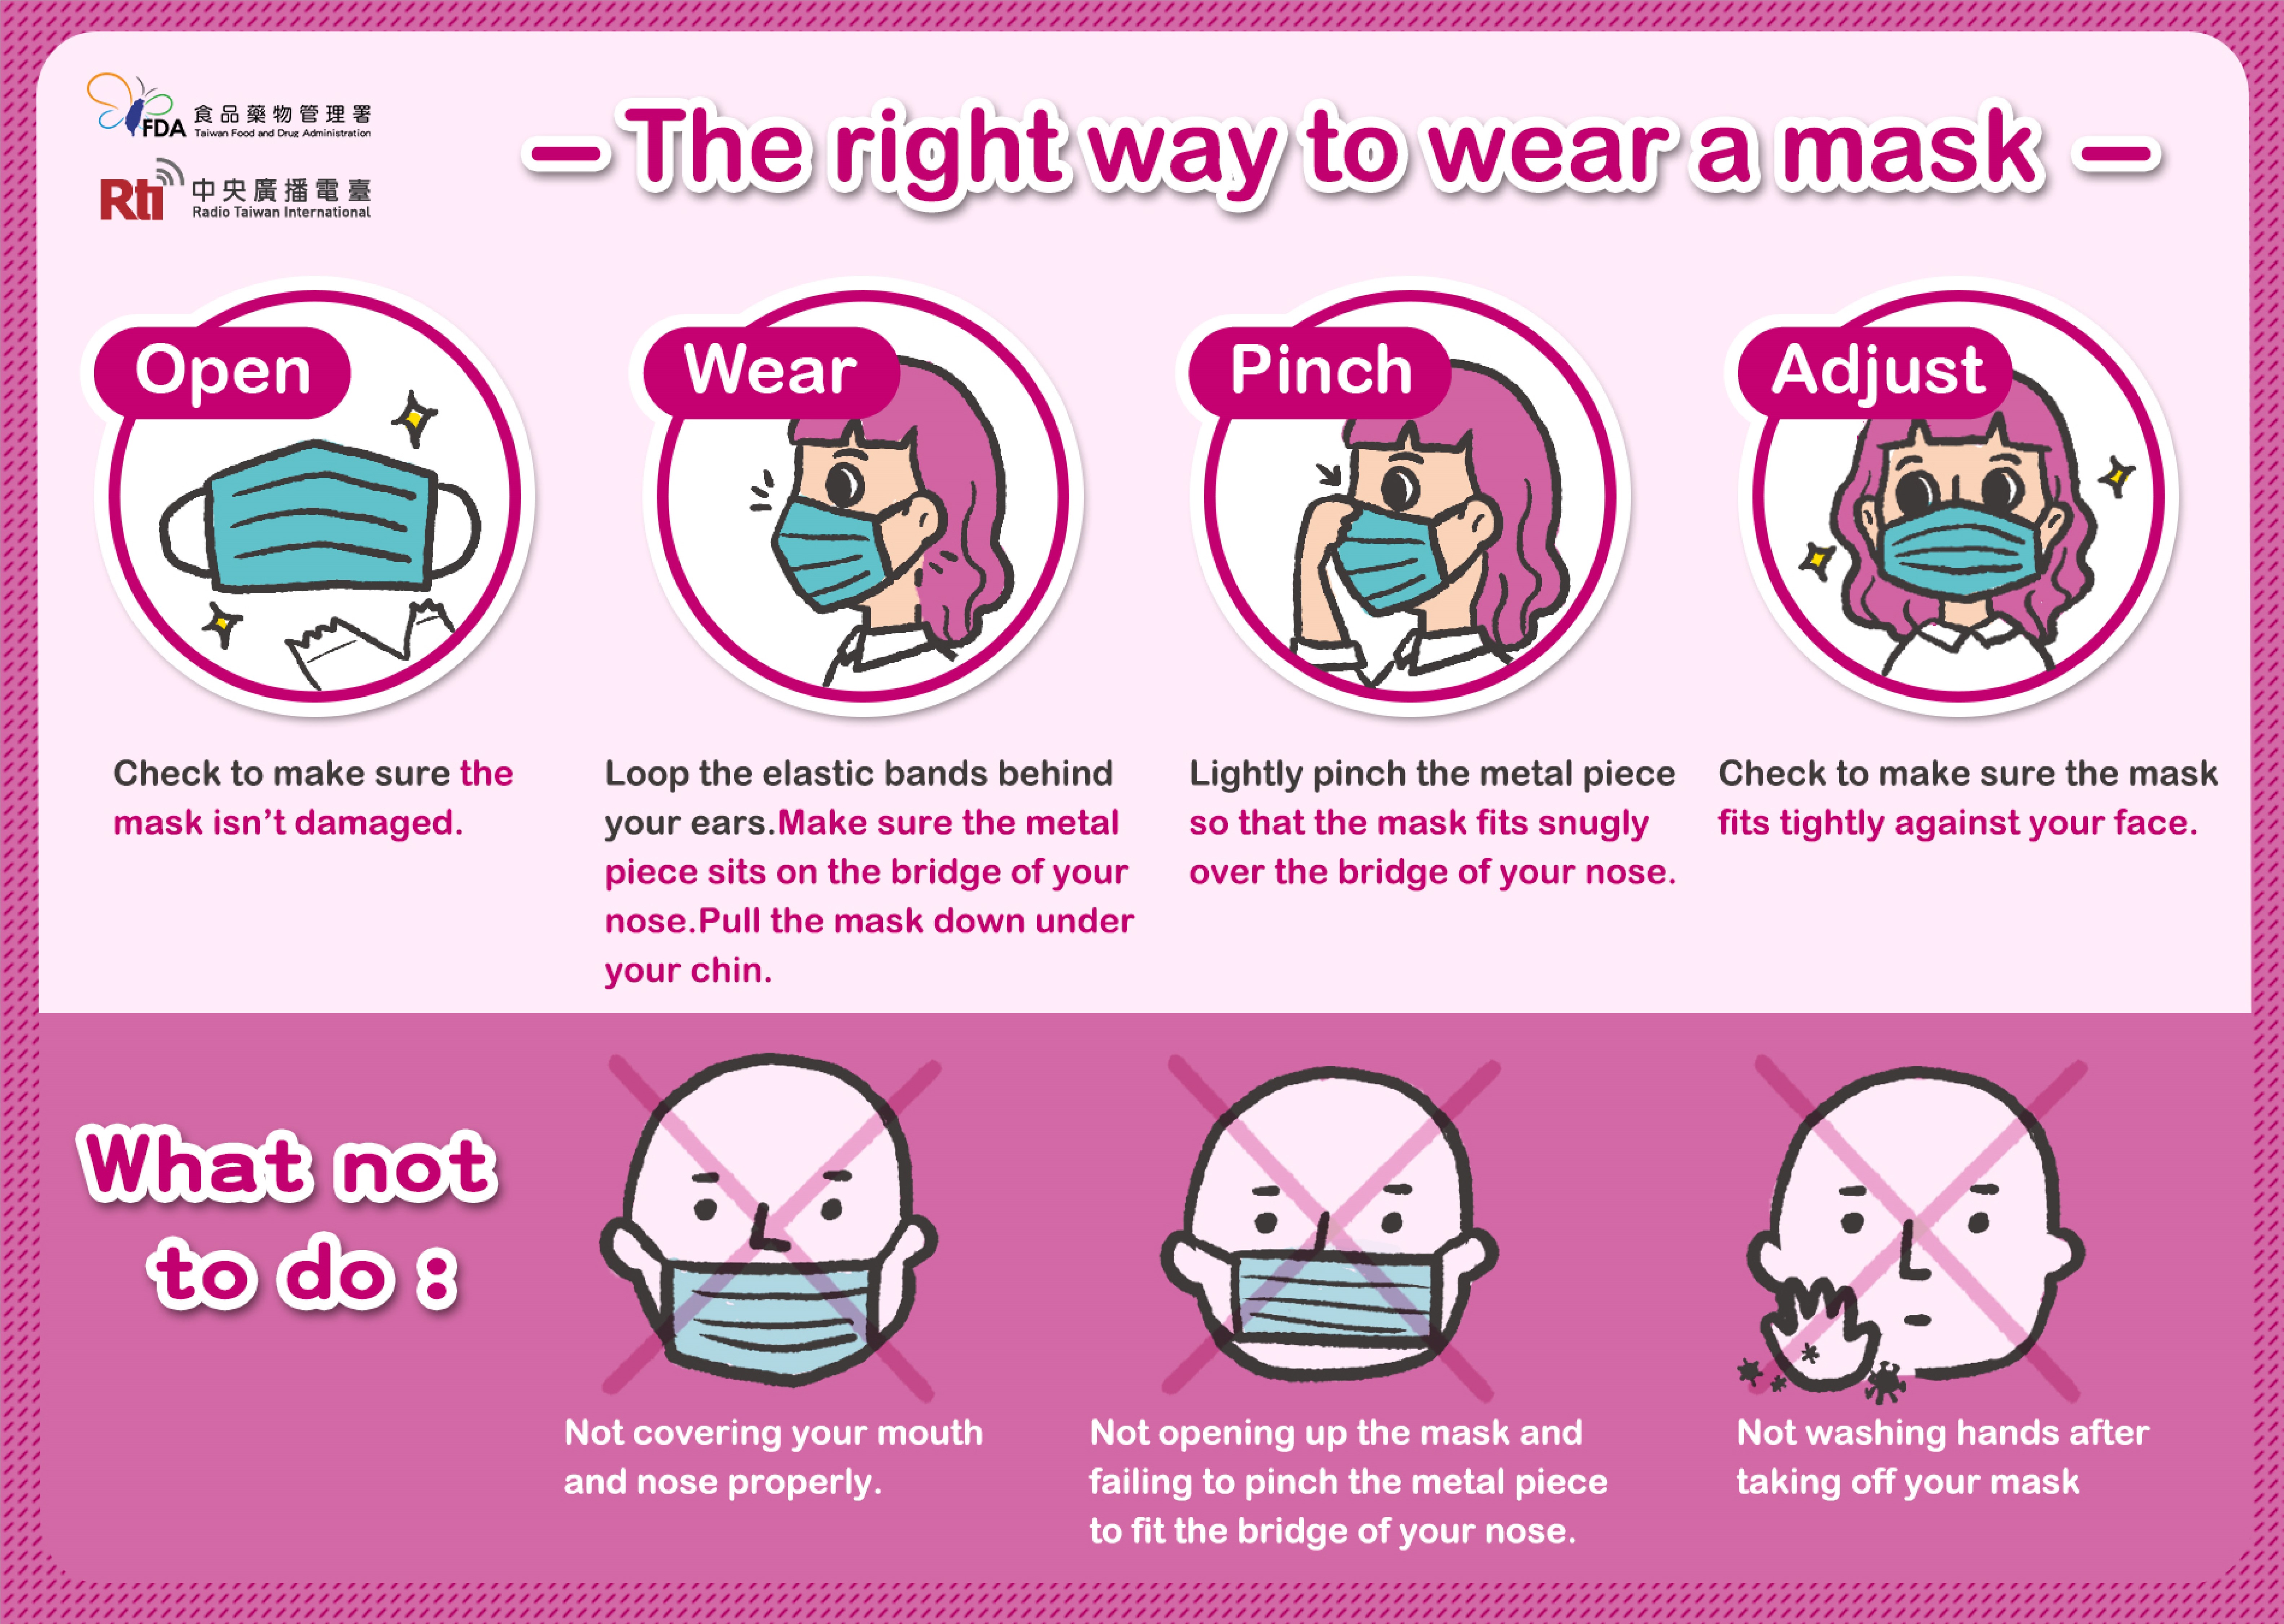 The right way to wear a mask